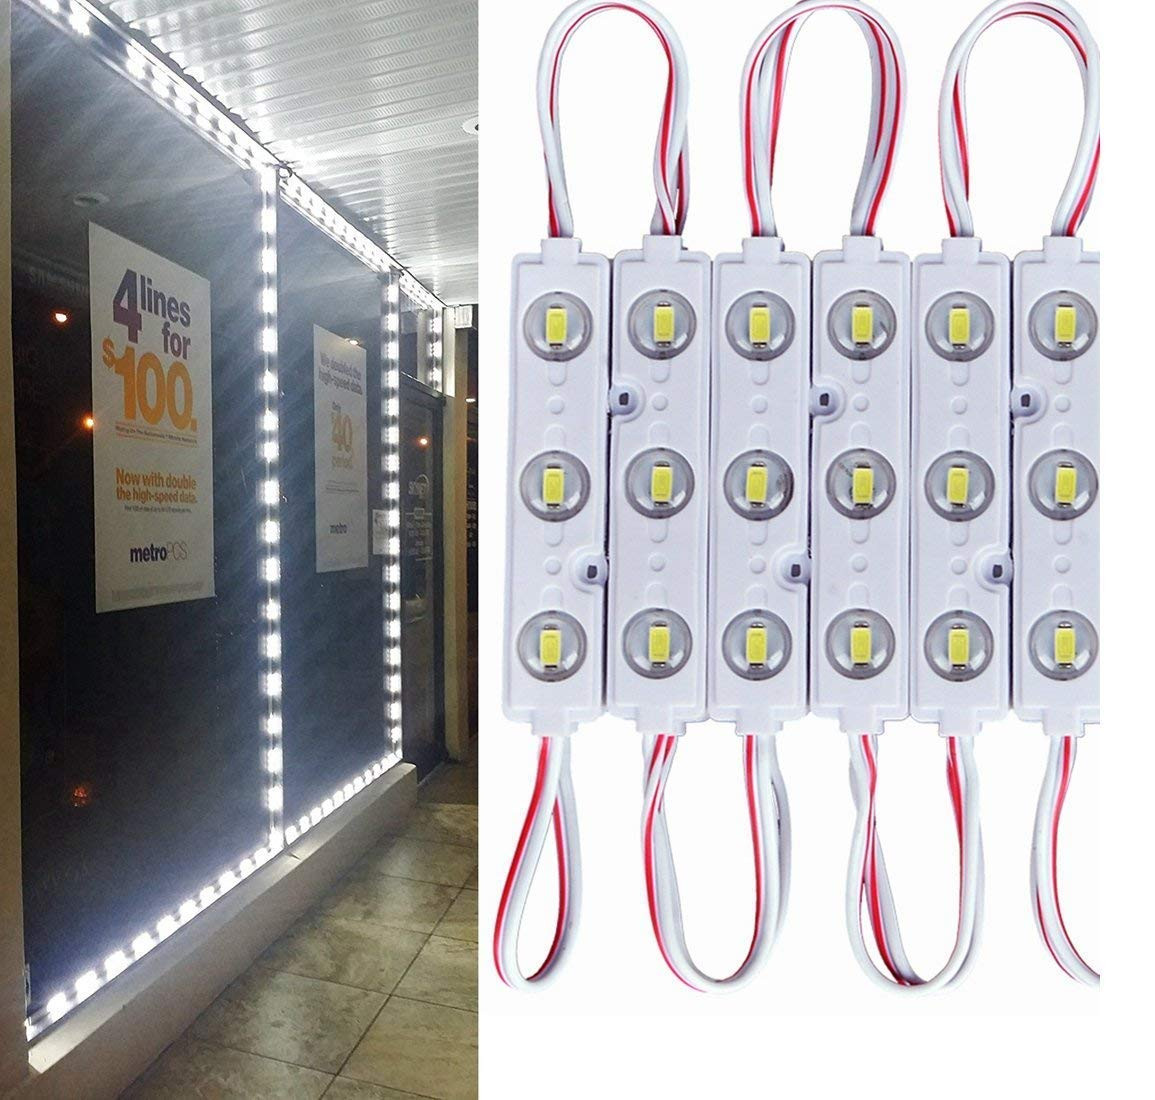 20pcs/pack LED Modules String with 5730 3 LED 160°Beam DC12V 90LM 1.5W Module Light for Sign Lettering Storefront Window Exterior Light, Waterproof IP67 with Adhesive Tape Back